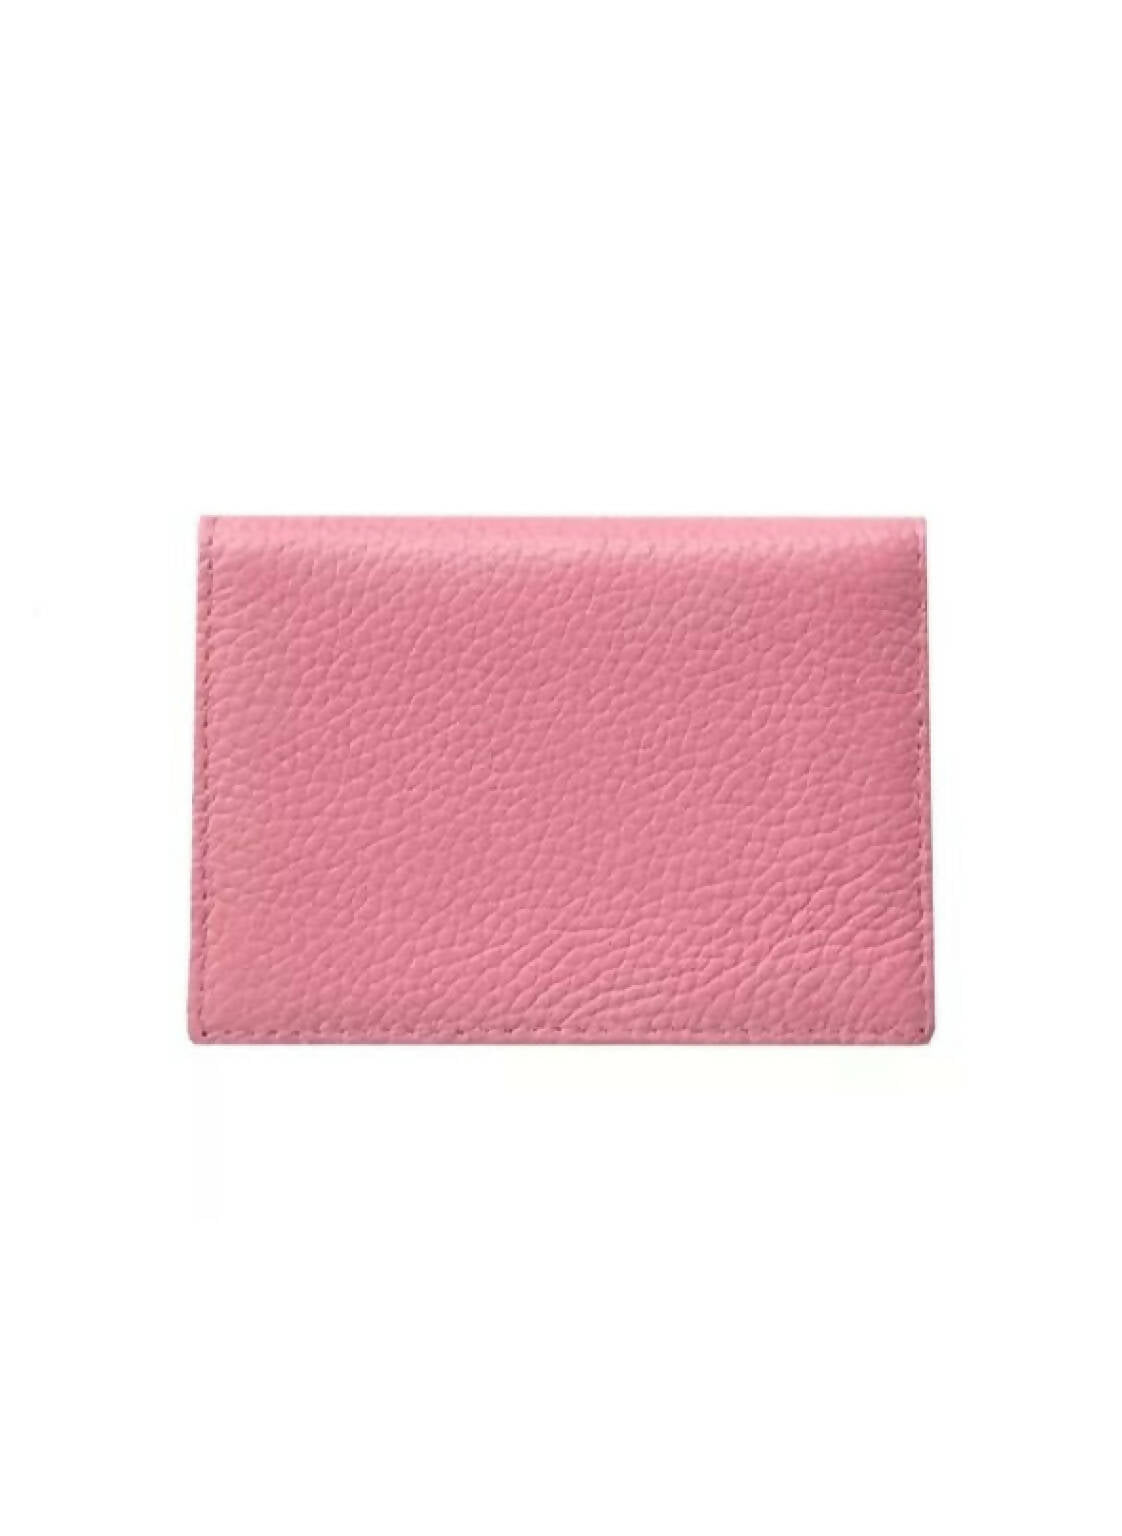 Customizable 5 Cards Wallet - Pink